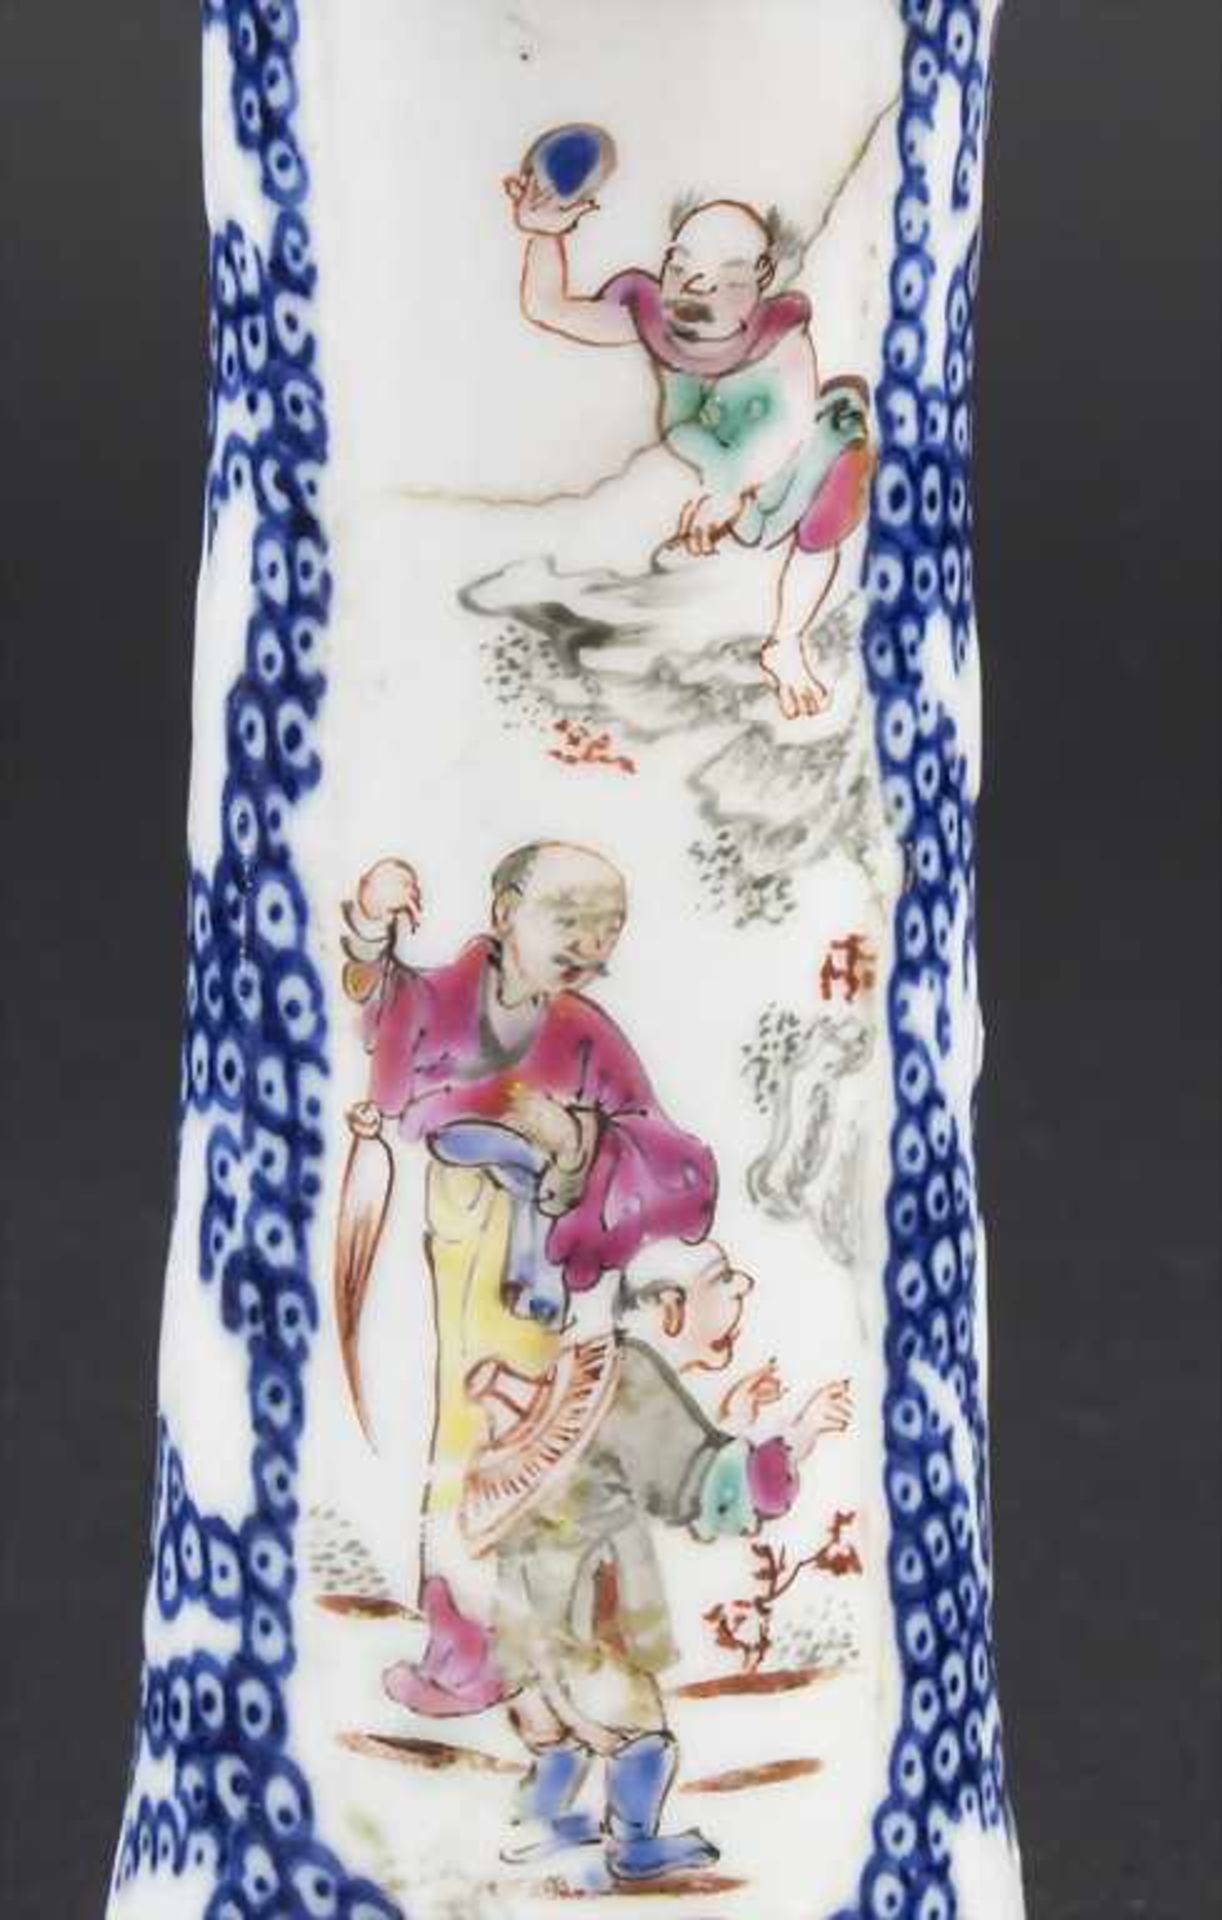 Ziervase / A decorative porcelain vase, China, Qing Dynastie (1644-1911), 18. Jh.Mater - Image 8 of 9